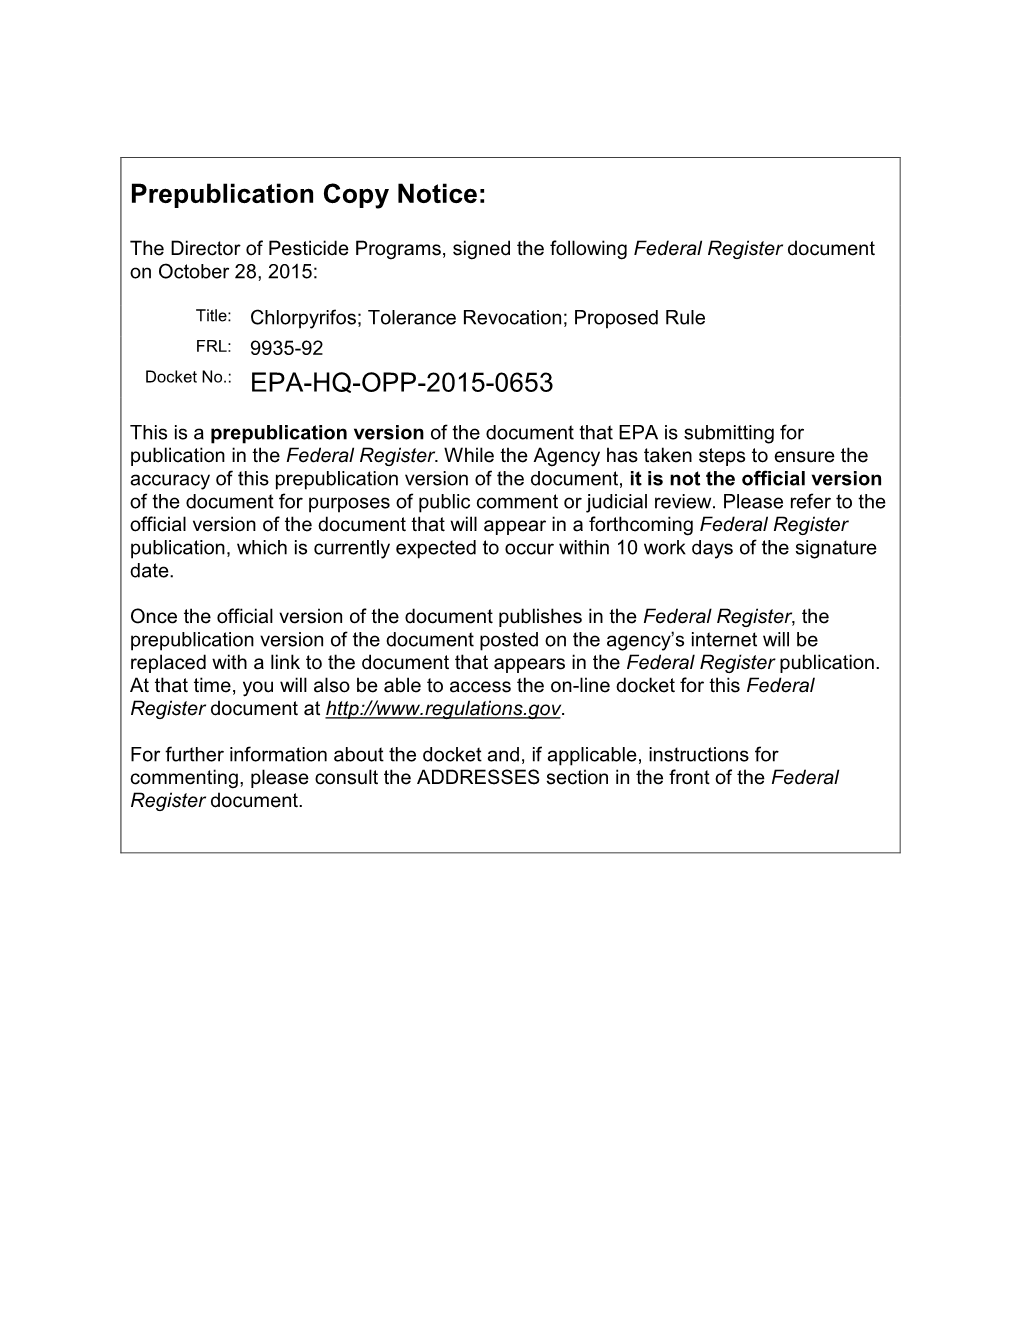 Chlorpyrifos; Tolerance Revocations AGENCY: Environmental Protection Agency (EPA)